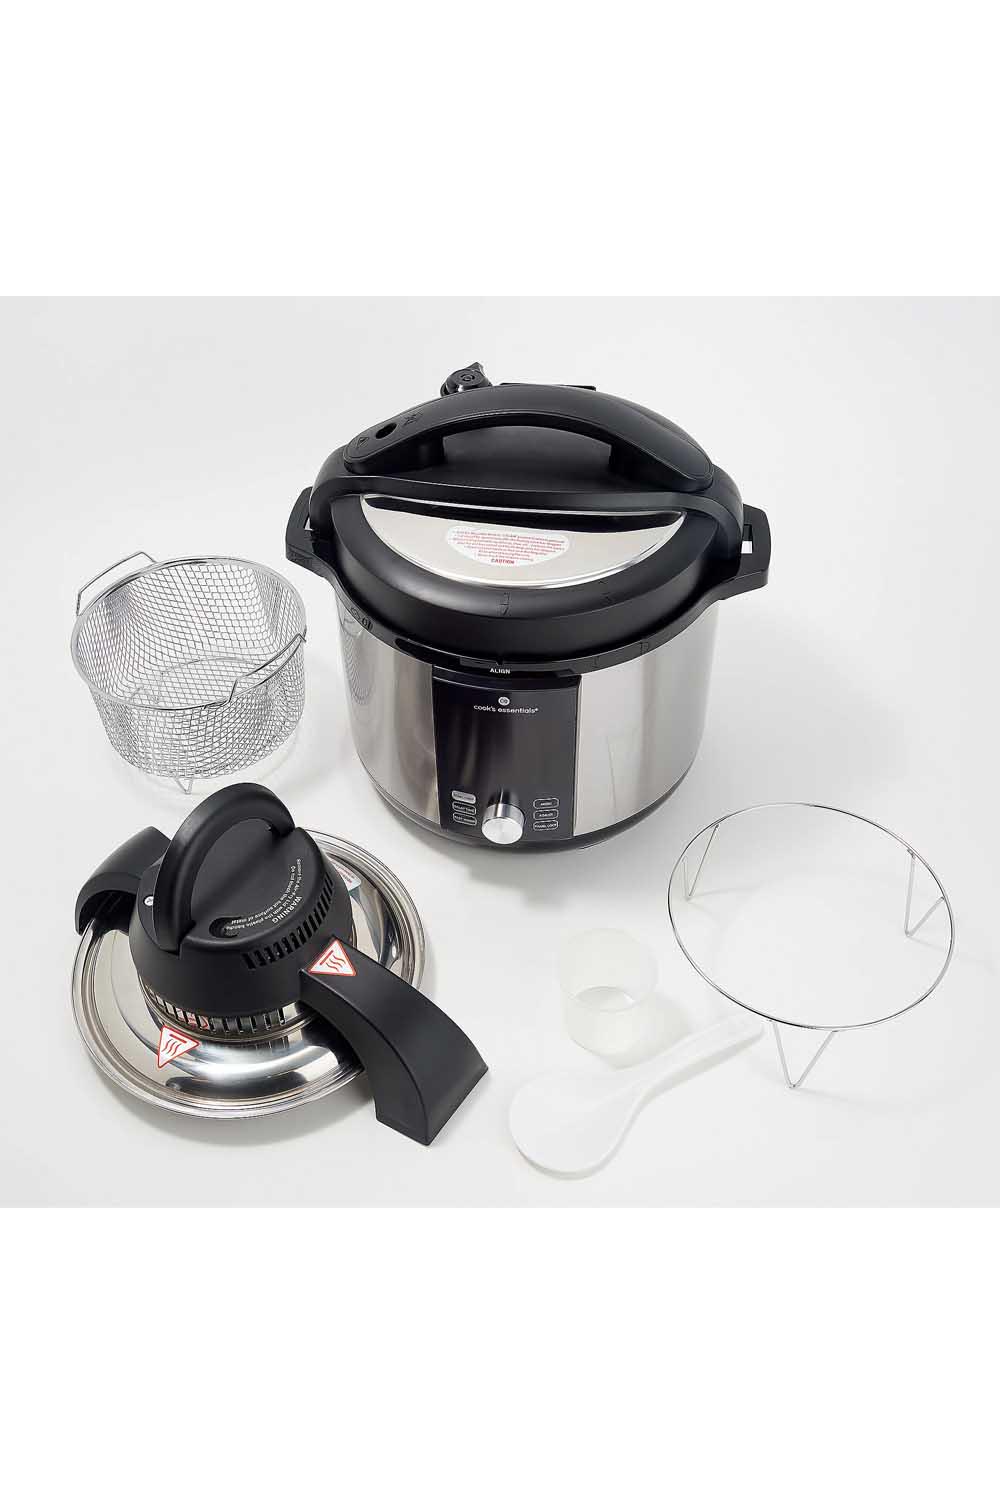 Chef Robert Irvine 4-Cup Rice Cooker w/ Spoon and Measuring Cup 